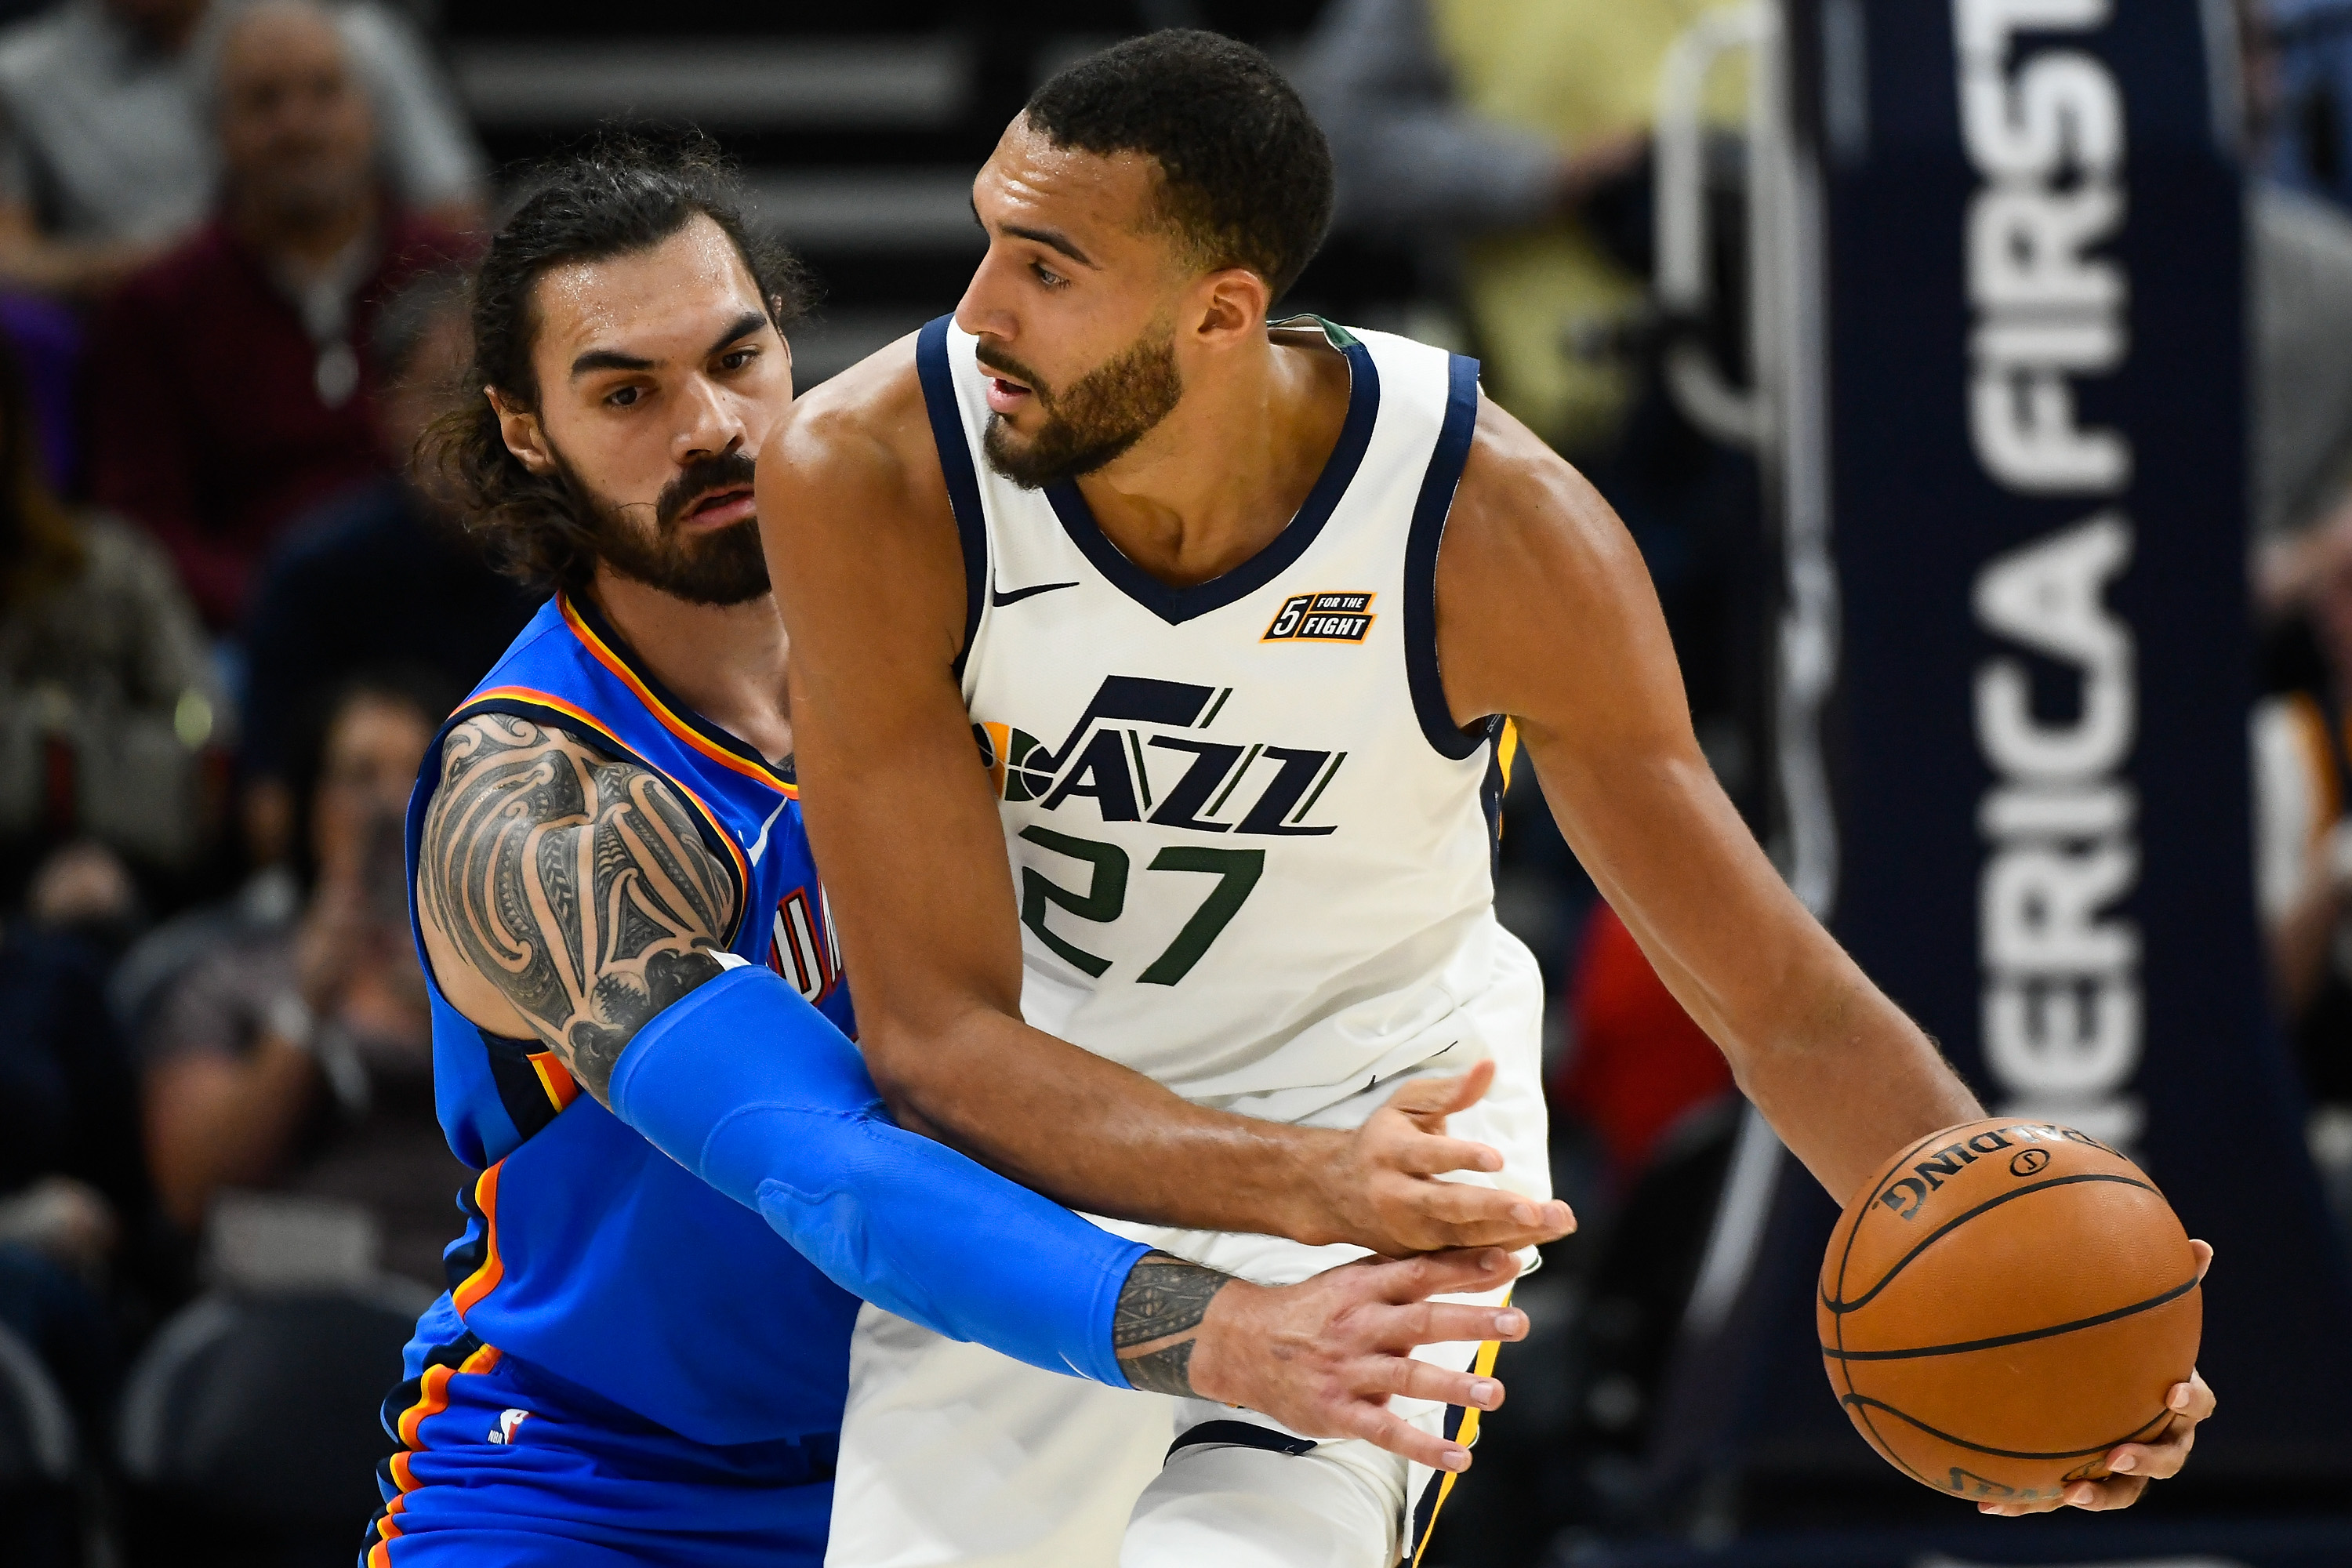 NBA Reveals If Rudy Gobert Will Be Punished For Recklessness